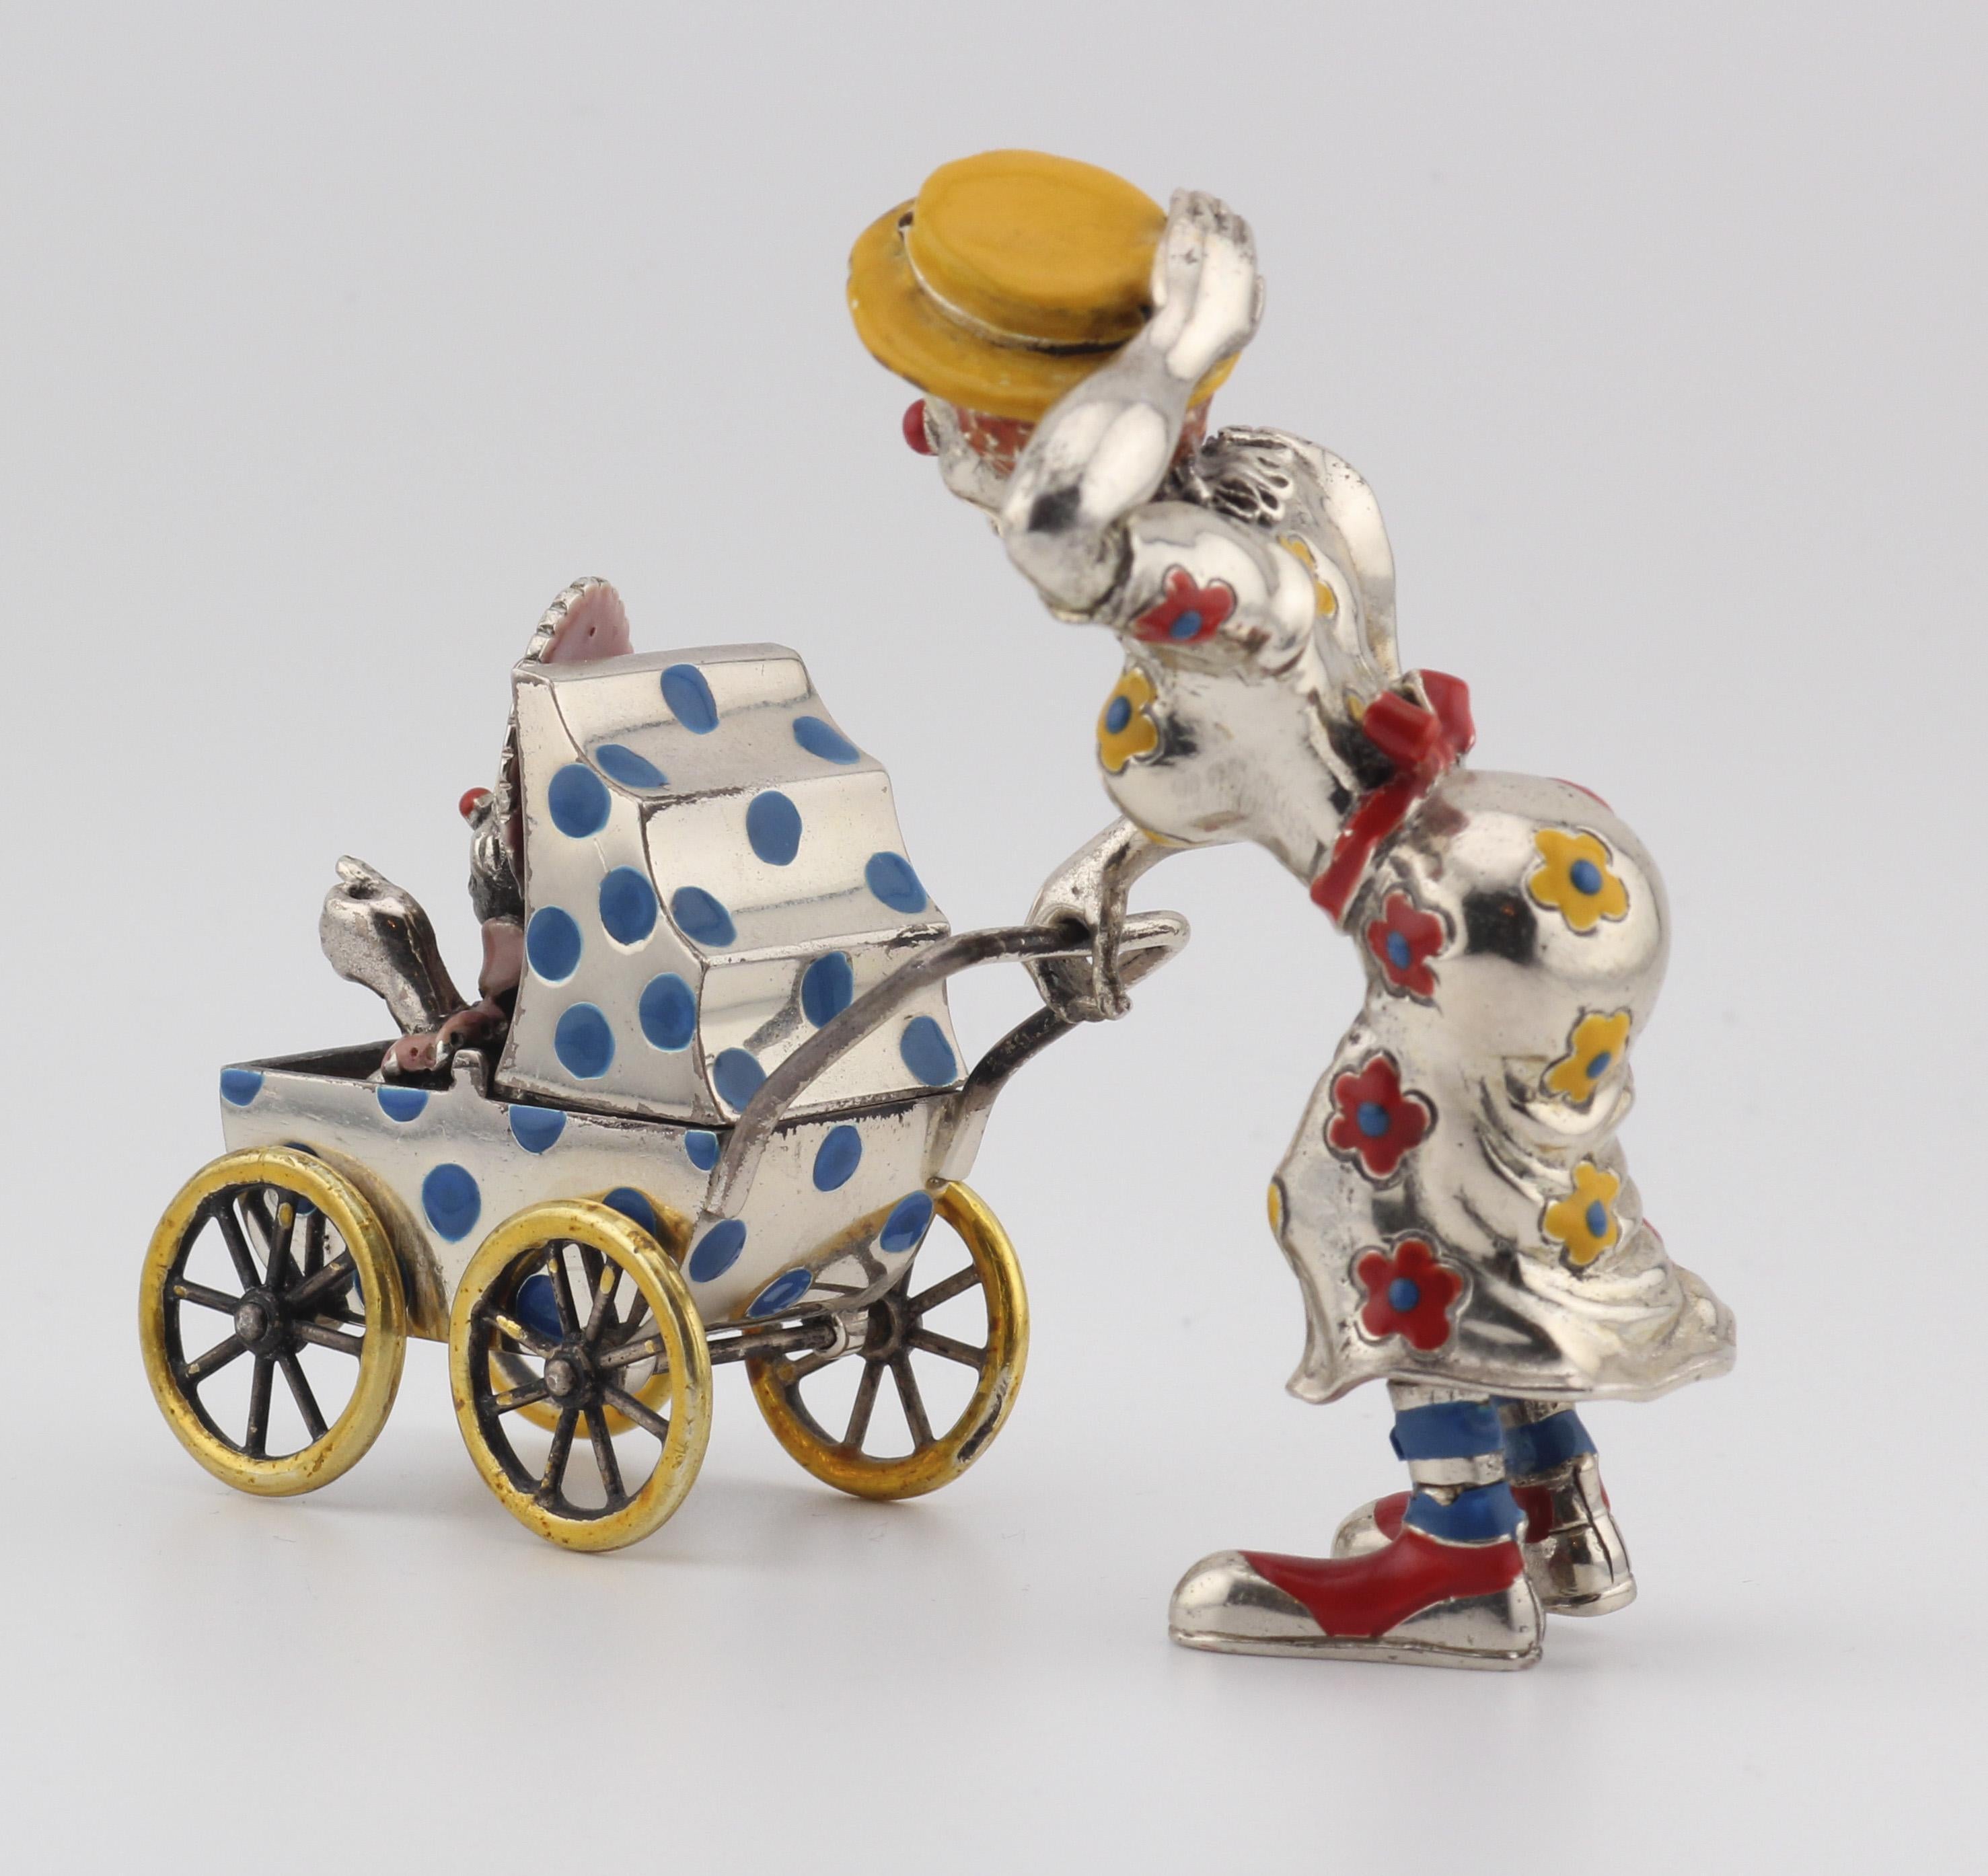 Step into the enchanting world of whimsy and craftsmanship with this Tiffany & Co. Silver & Enamel Circus Clown Mother & Baby in Carriage Figurine. Meticulously crafted, this figurine is a testament to Tiffany & Co.'s legacy of creating exceptional